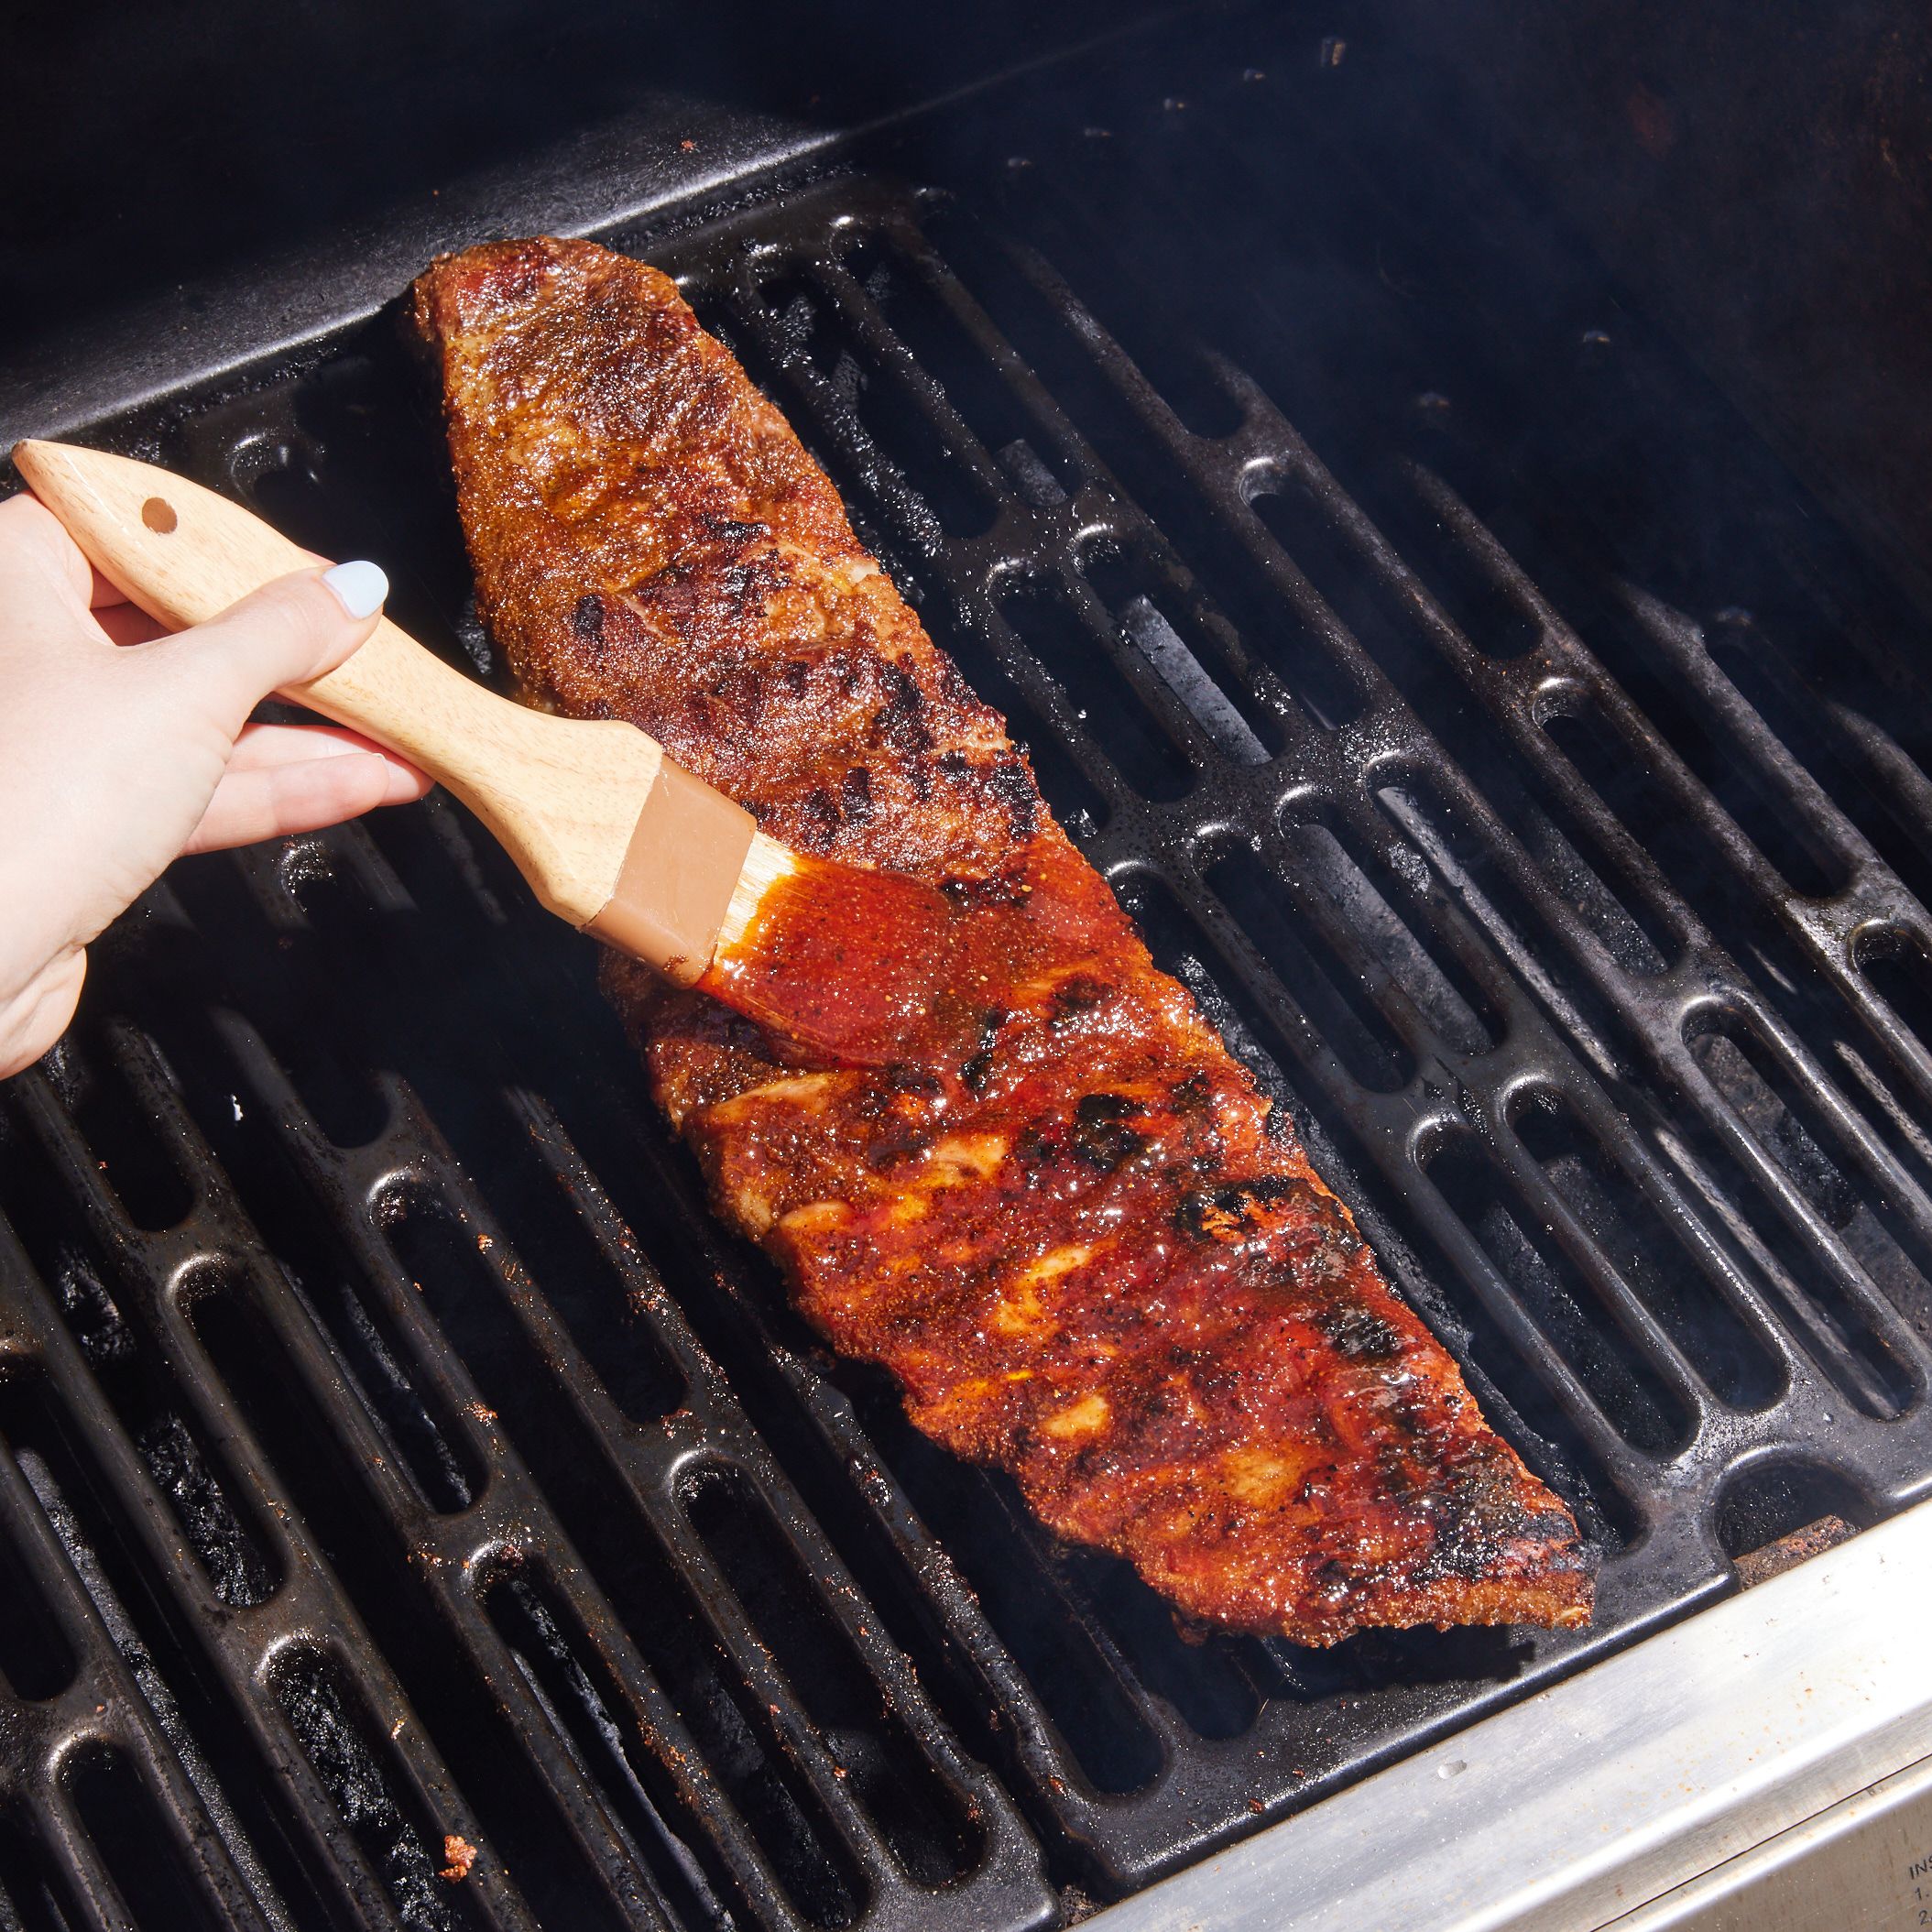 100 Best Grilling Ideas & Recipes – Creative Things To Cook on the Grill